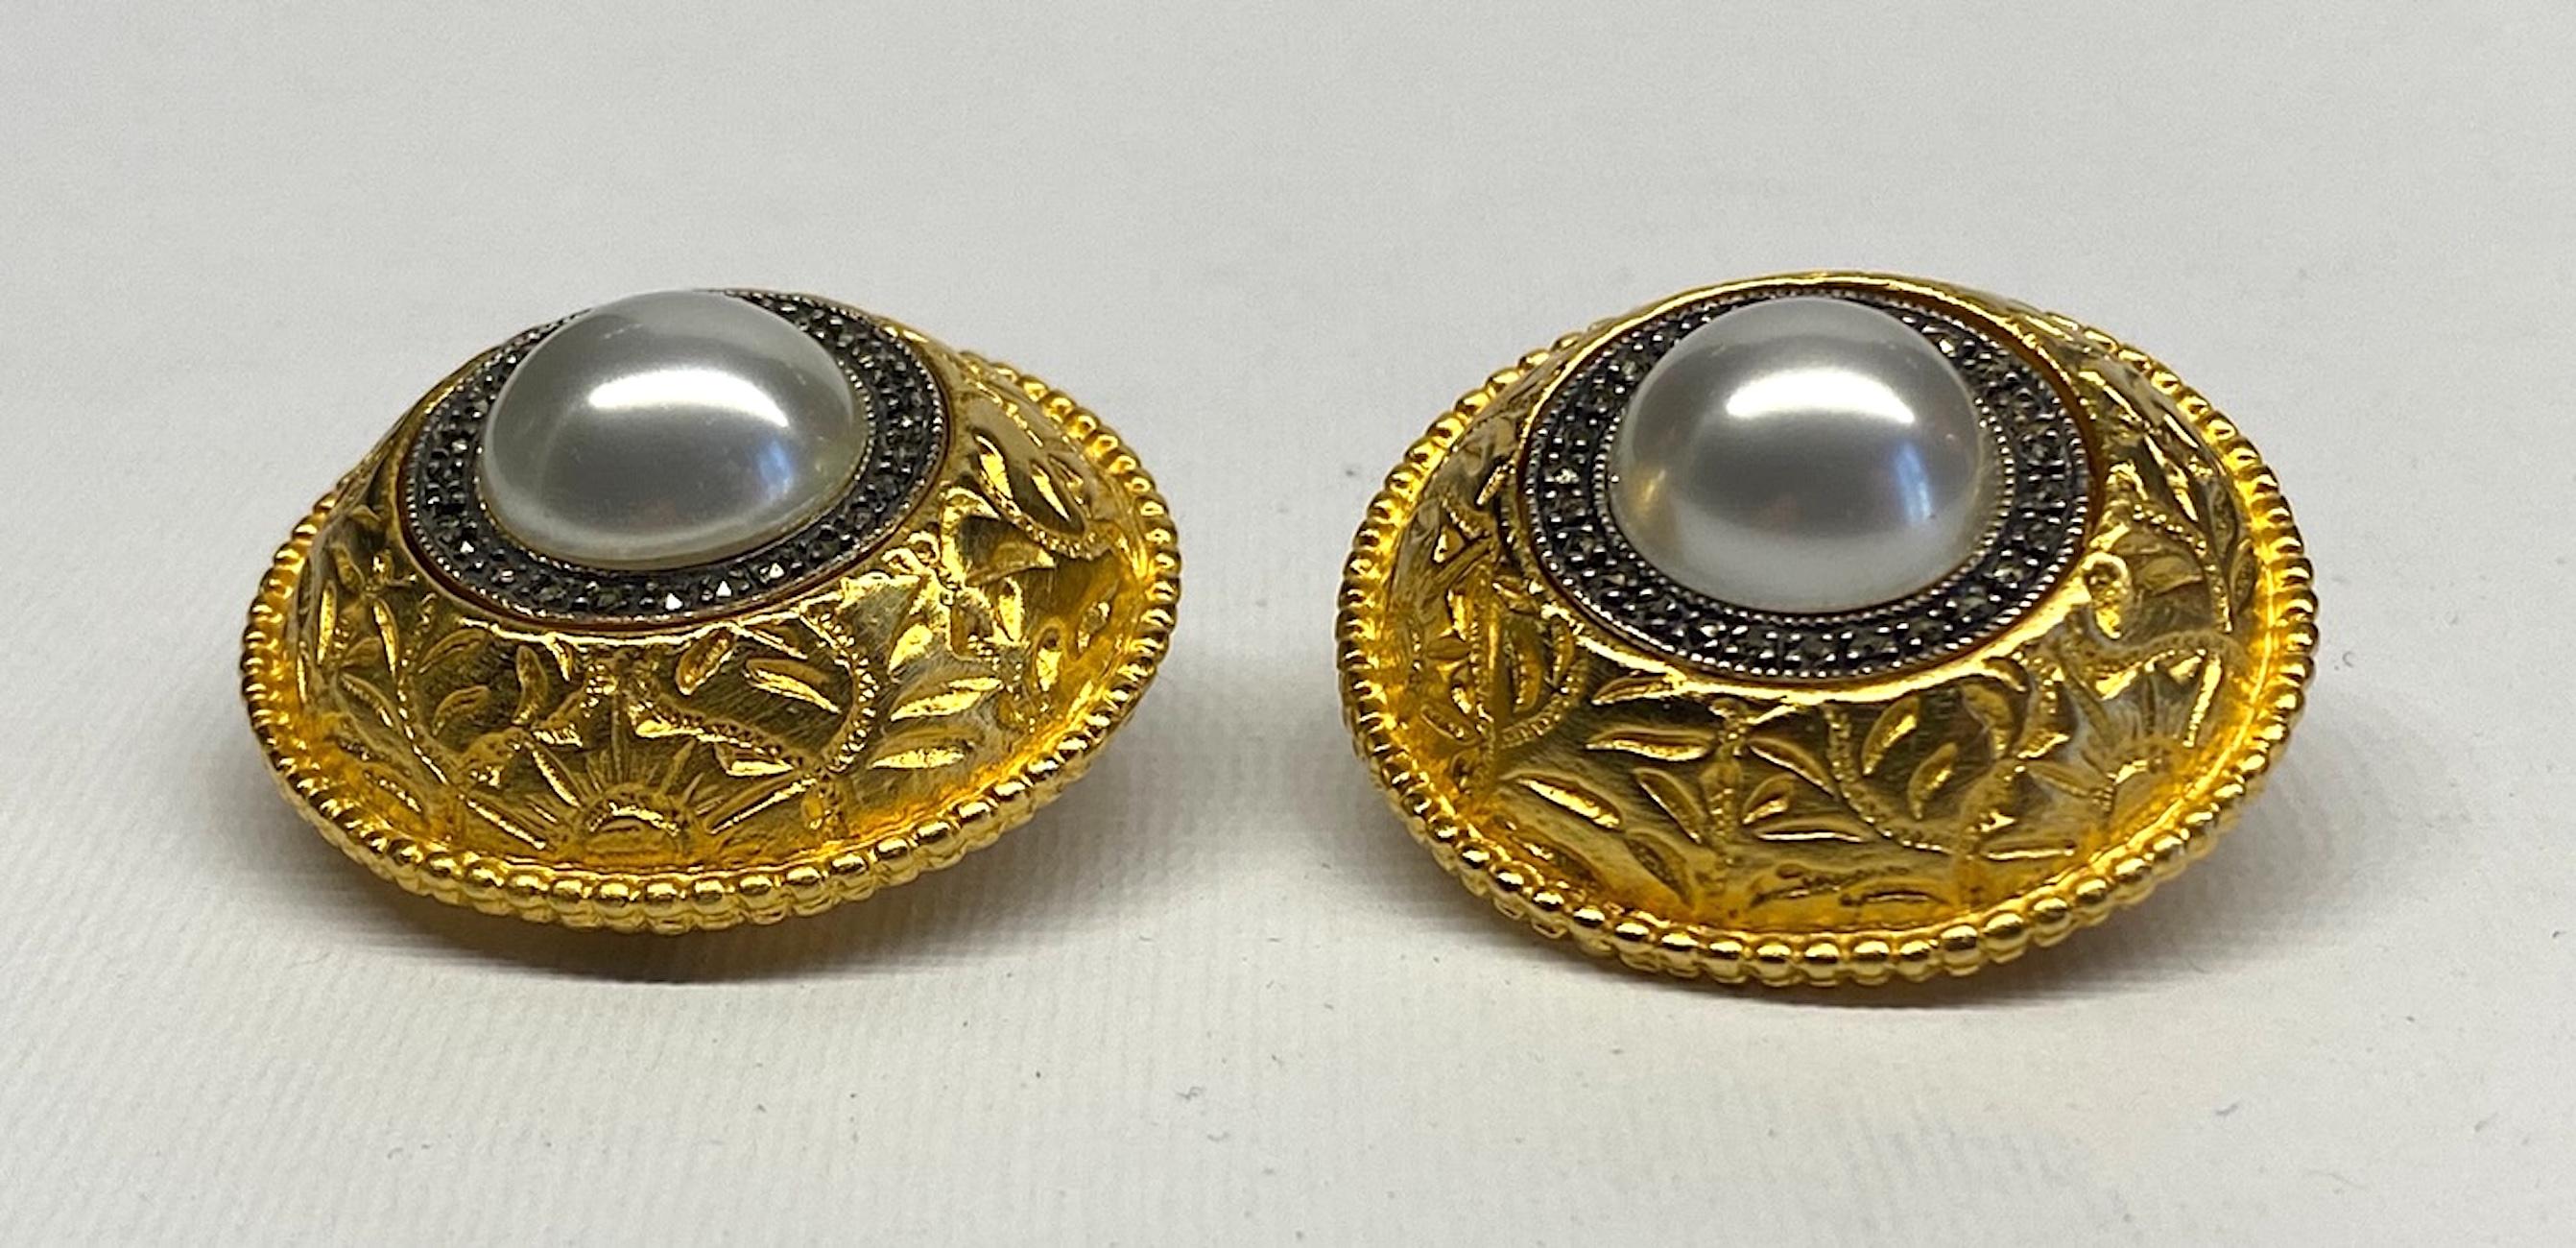 A truly lovely pair of elegant and large 1980s button earrings by Judith Jack. Each earrings is 1.38 in diameter and .63 of an inch high not including the clip back. A large central 14 mm faux pearl cabochon is mounted into a sterling silver setting